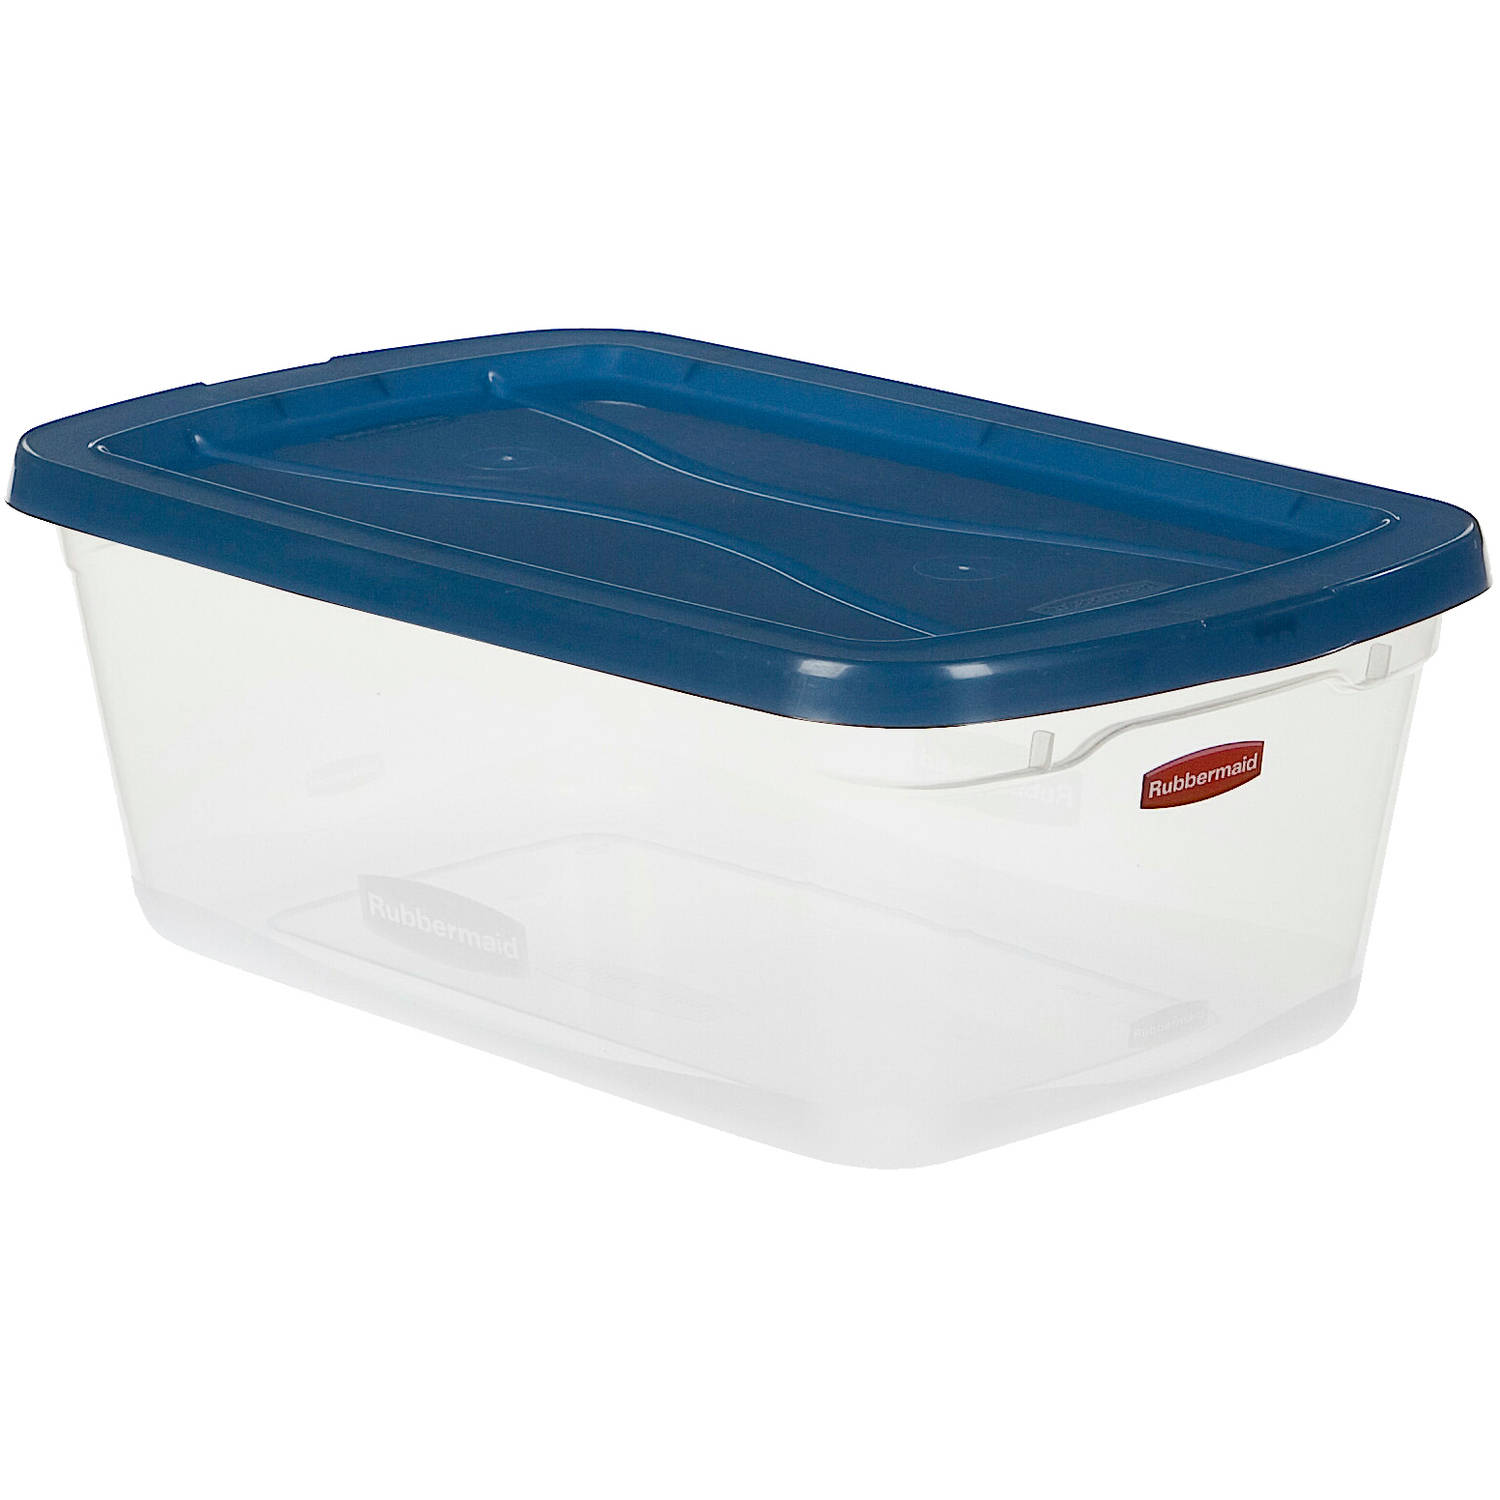 Rubbermaid Clever Store Clears Storage Container, 6.5 qt, 10-Pack, Clear with Blue Lid - image 1 of 2